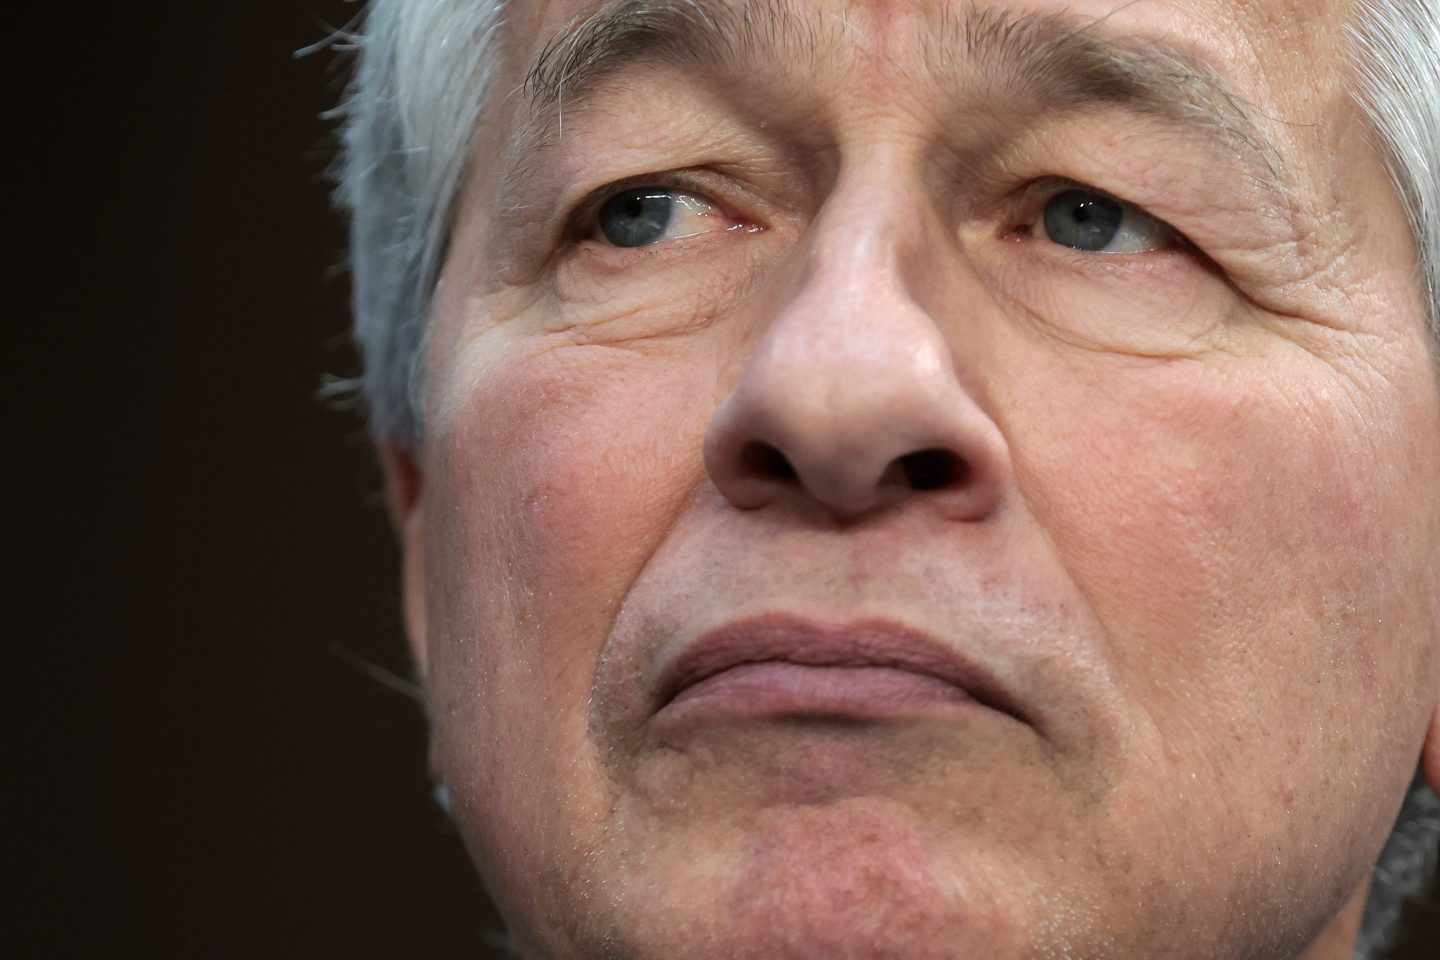 Jamie Dimon, Chairman and CEO of JPMorgan Chase